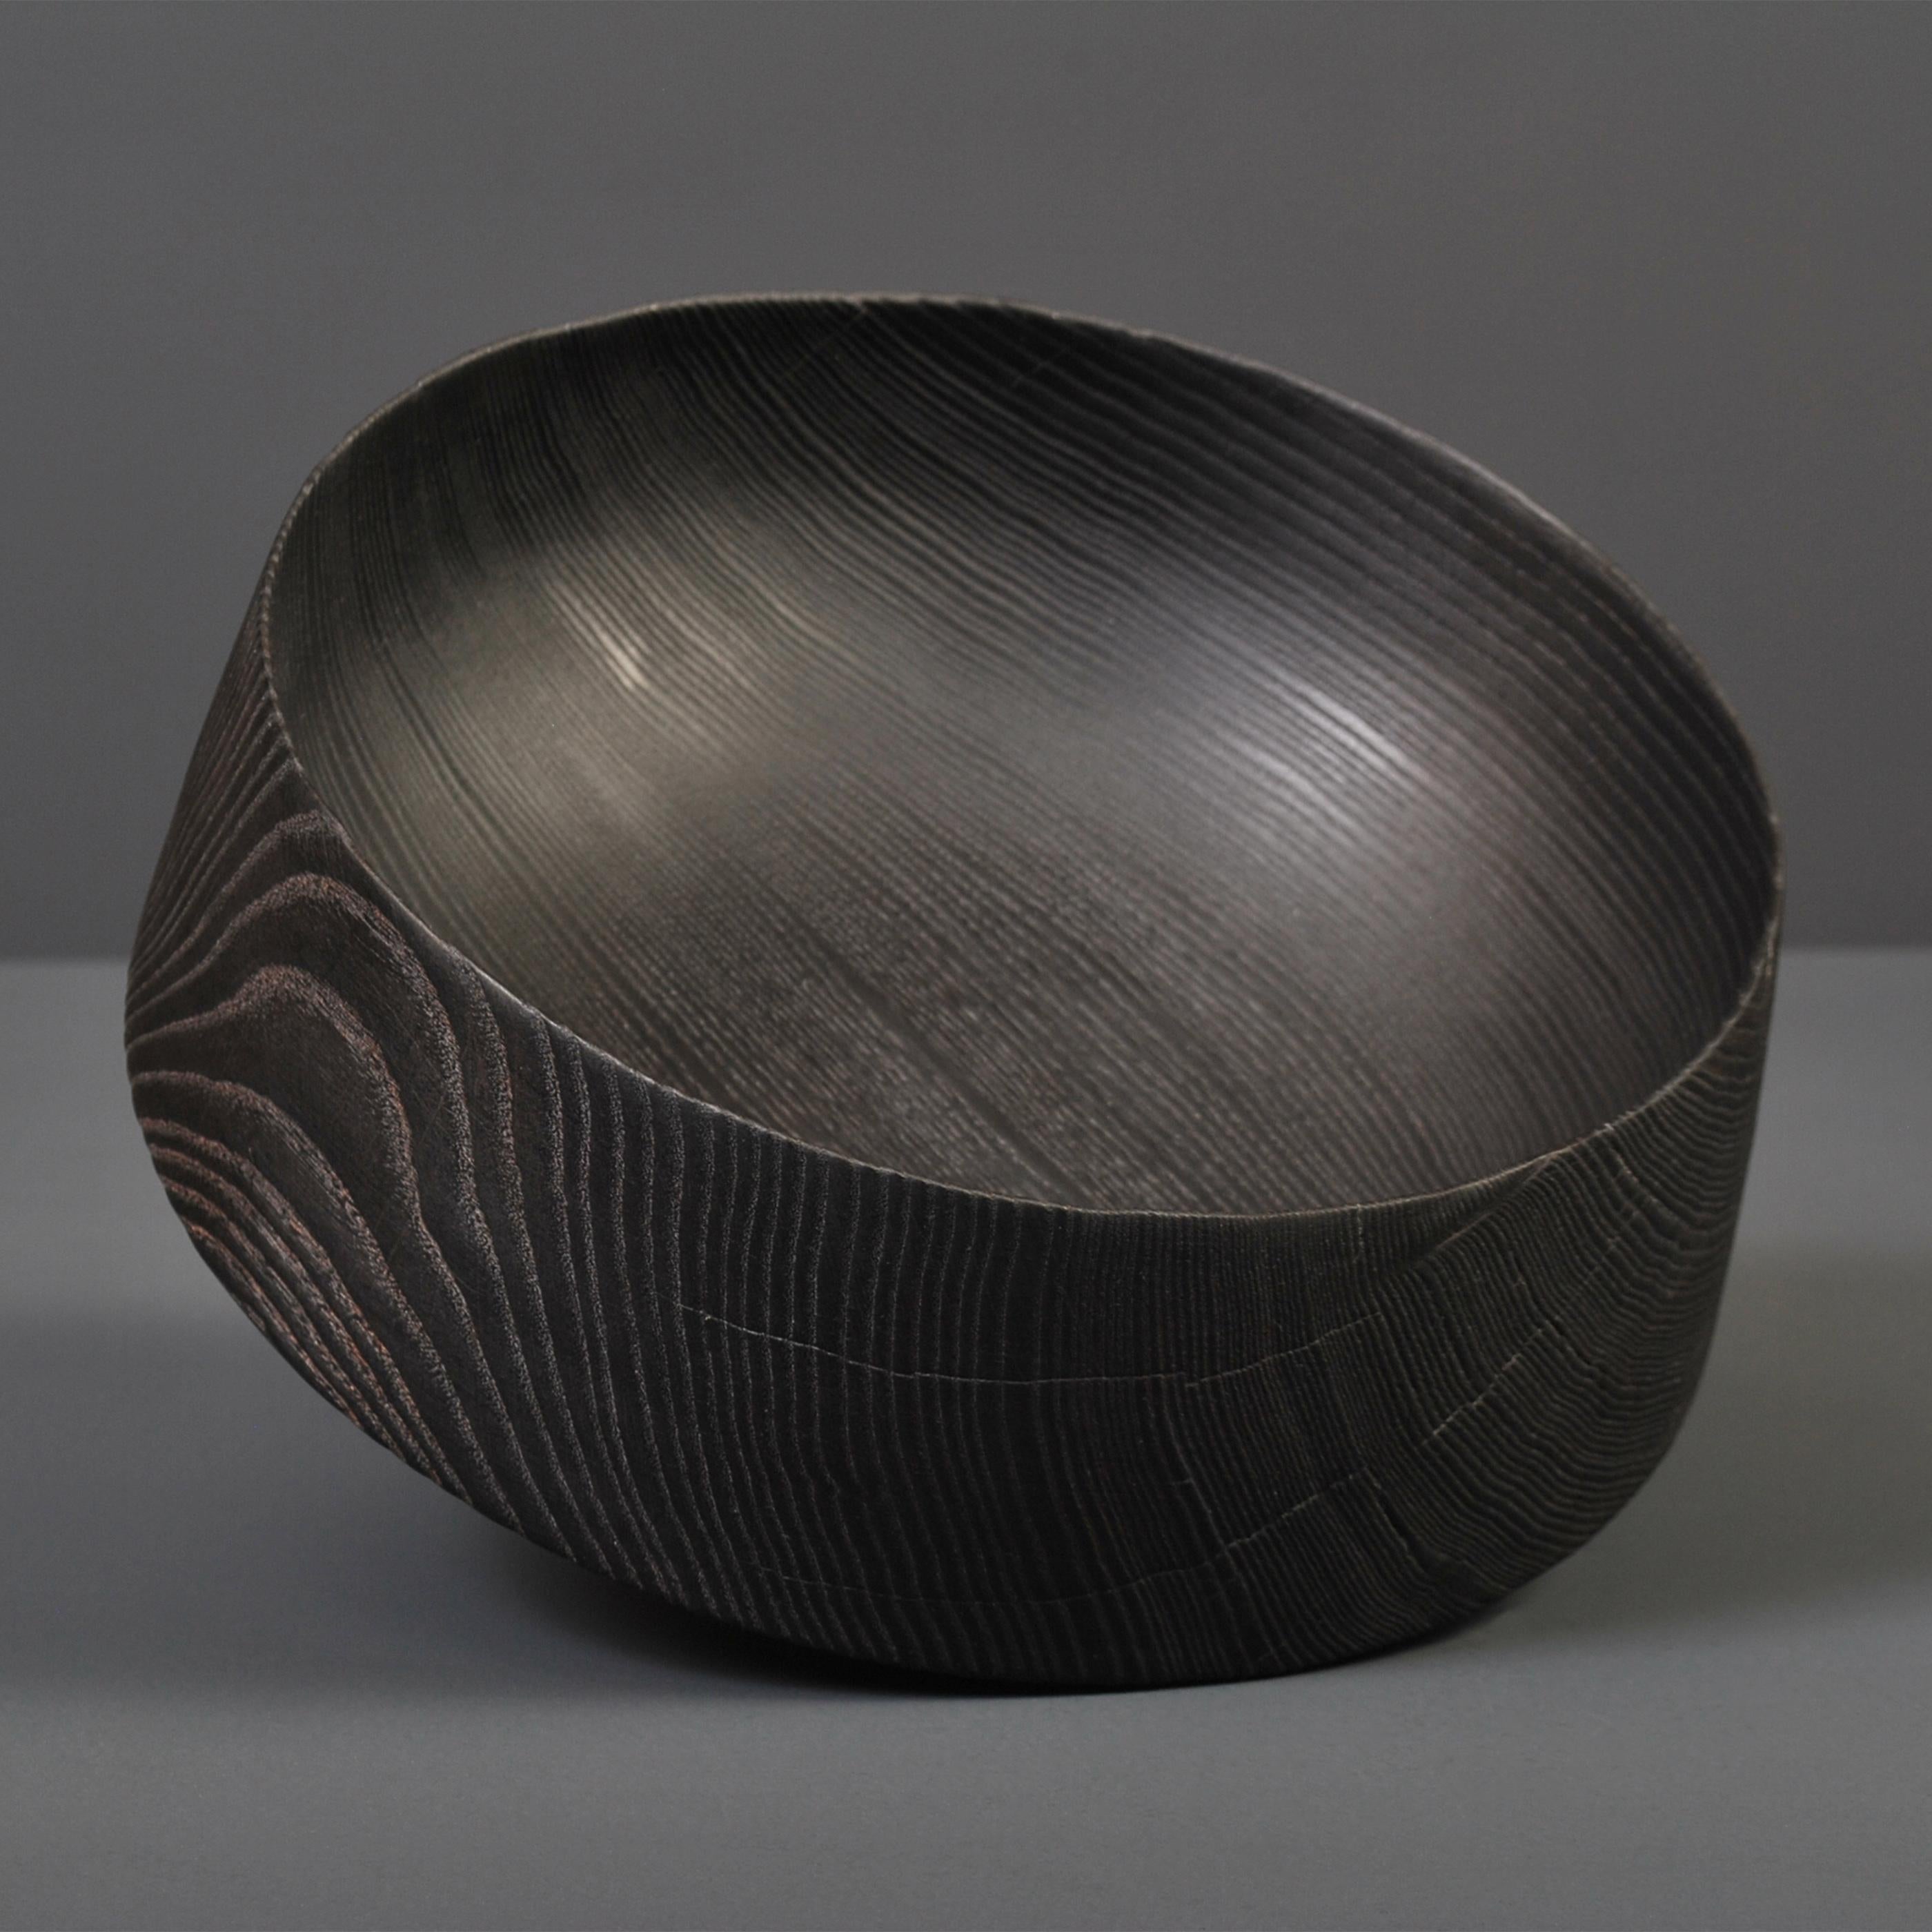 Fine traditionally hand-crafted and turned Ash Yakisugi platter - bowl. These are handmade to the very best quality in London using traditional techniques.
Finished in food safe oil.
Køben Bowl with Japanese Yakisugi Finish
A beautiful piece of